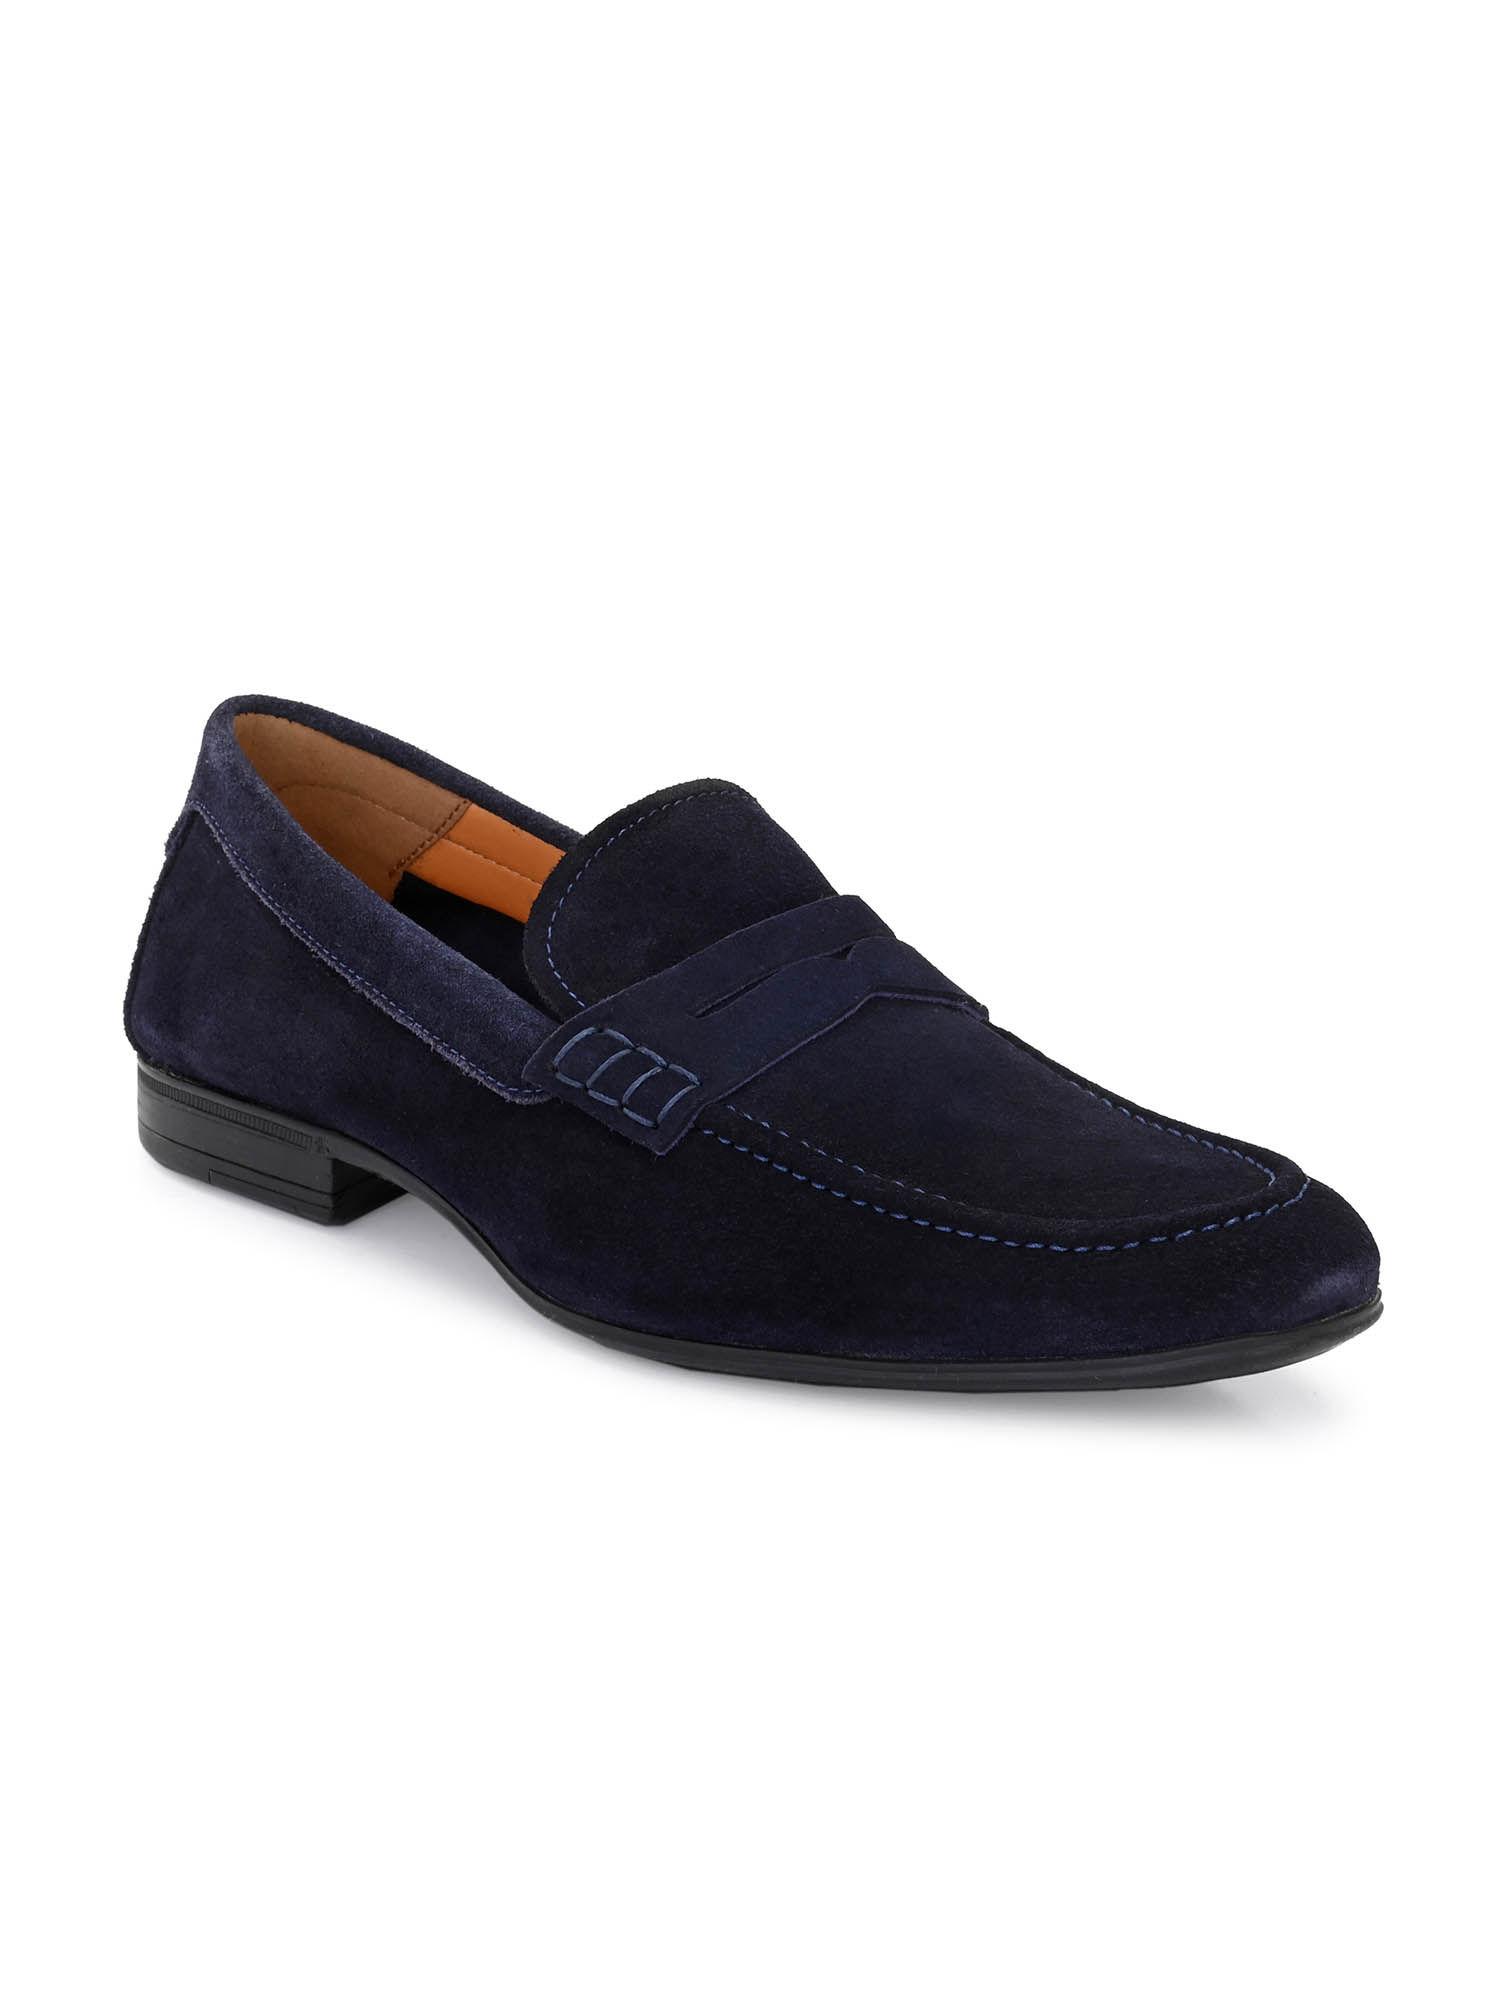 genuine-navy-suede-leather-formal-shoes